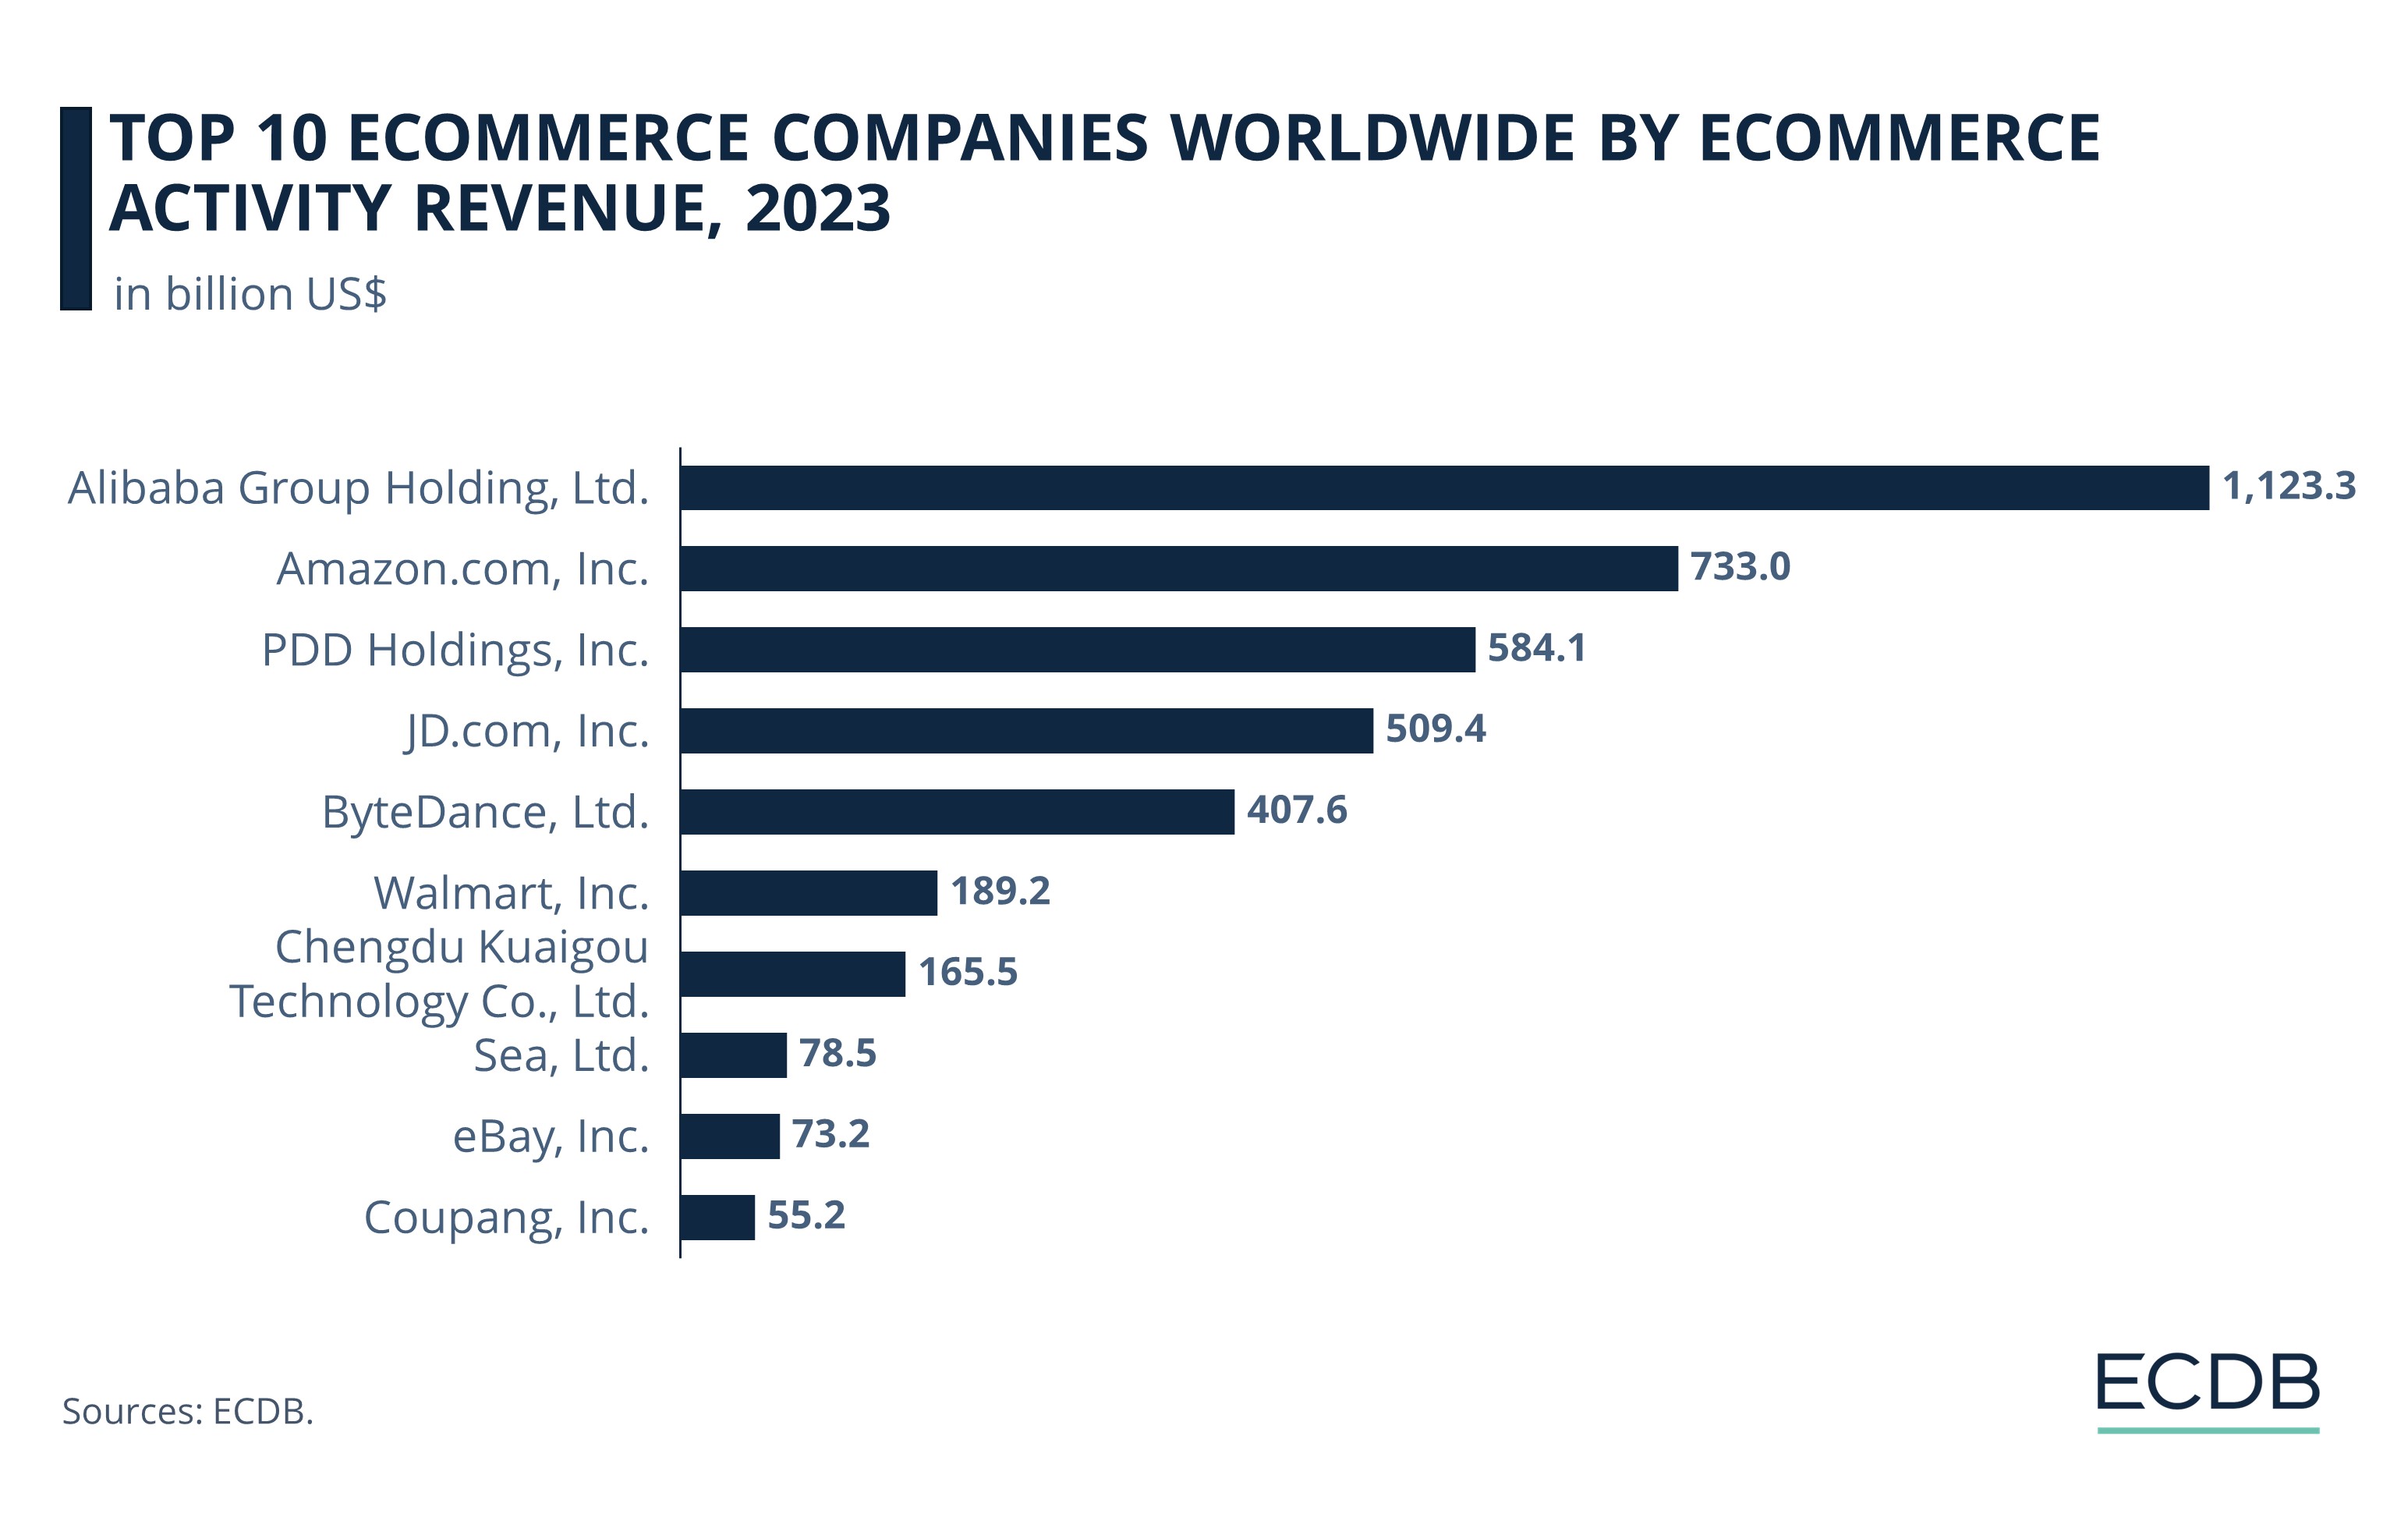 Top 10 Ecommerce Companies Worldwide by eCommerce Activity Revenue, 2023